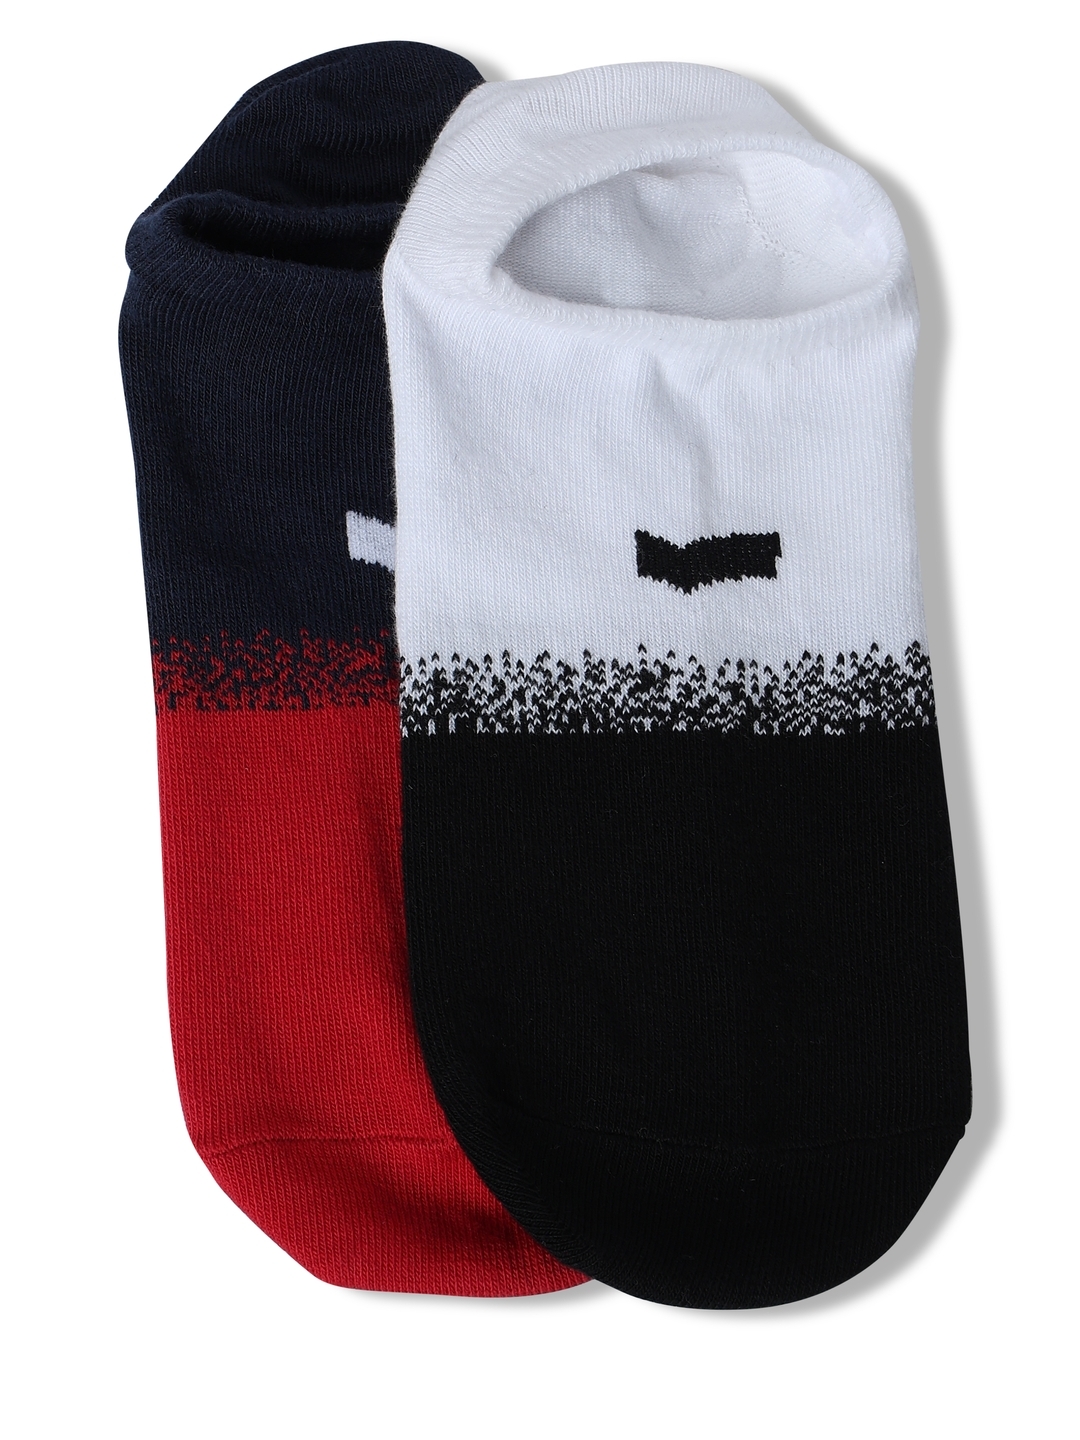 SYD IN Multi Colour Ombre Socks (Pack of 2)